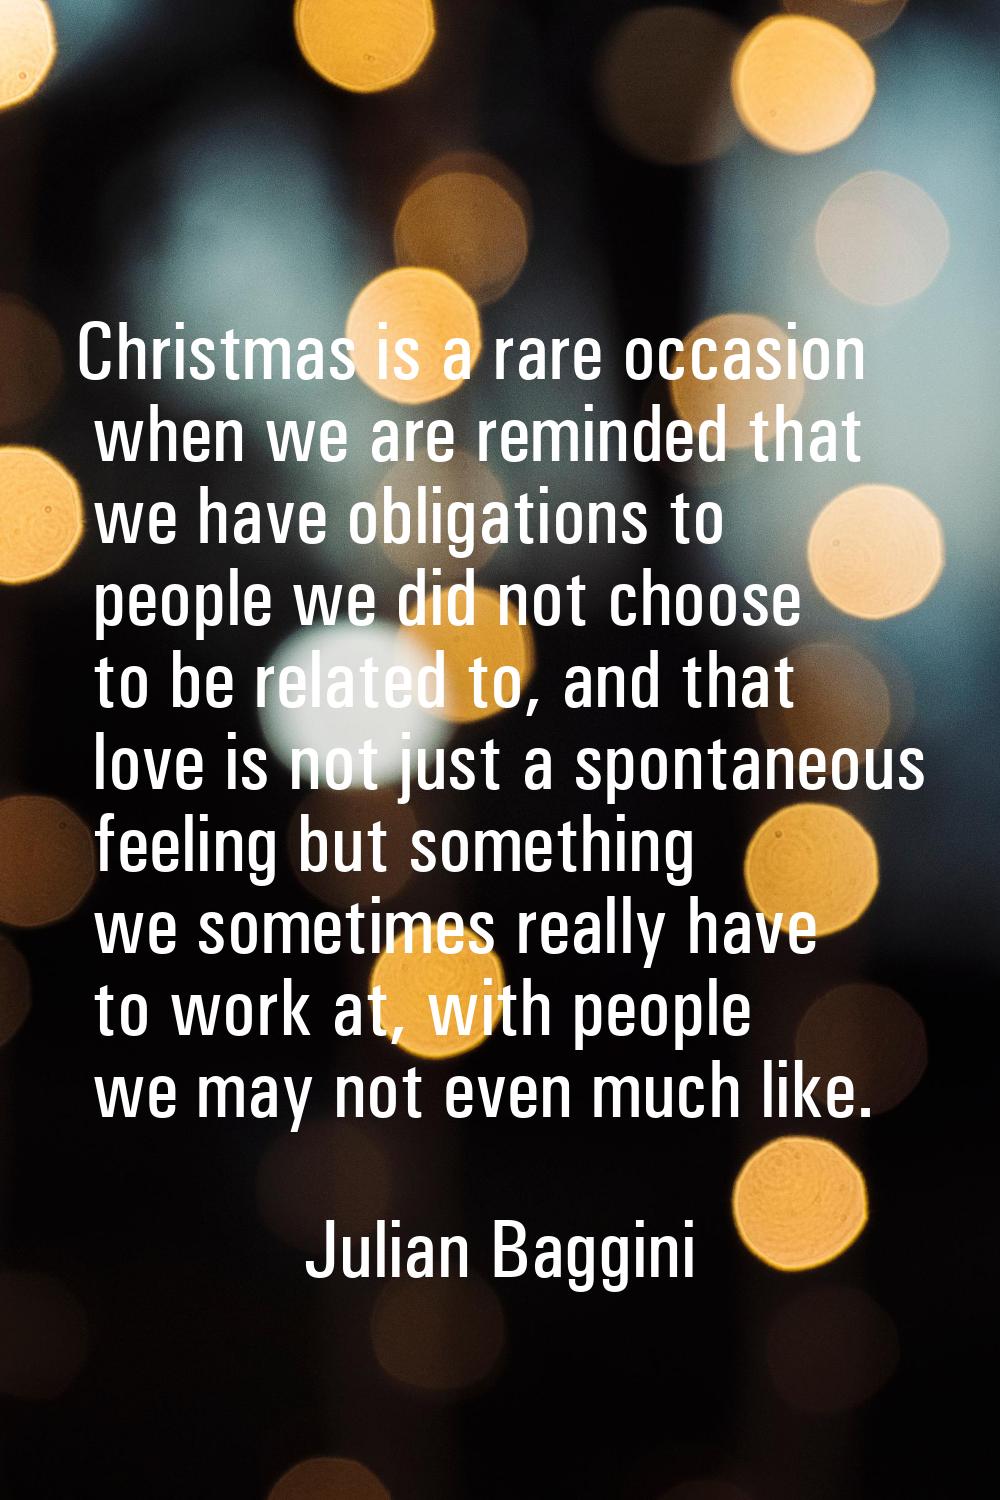 Christmas is a rare occasion when we are reminded that we have obligations to people we did not cho